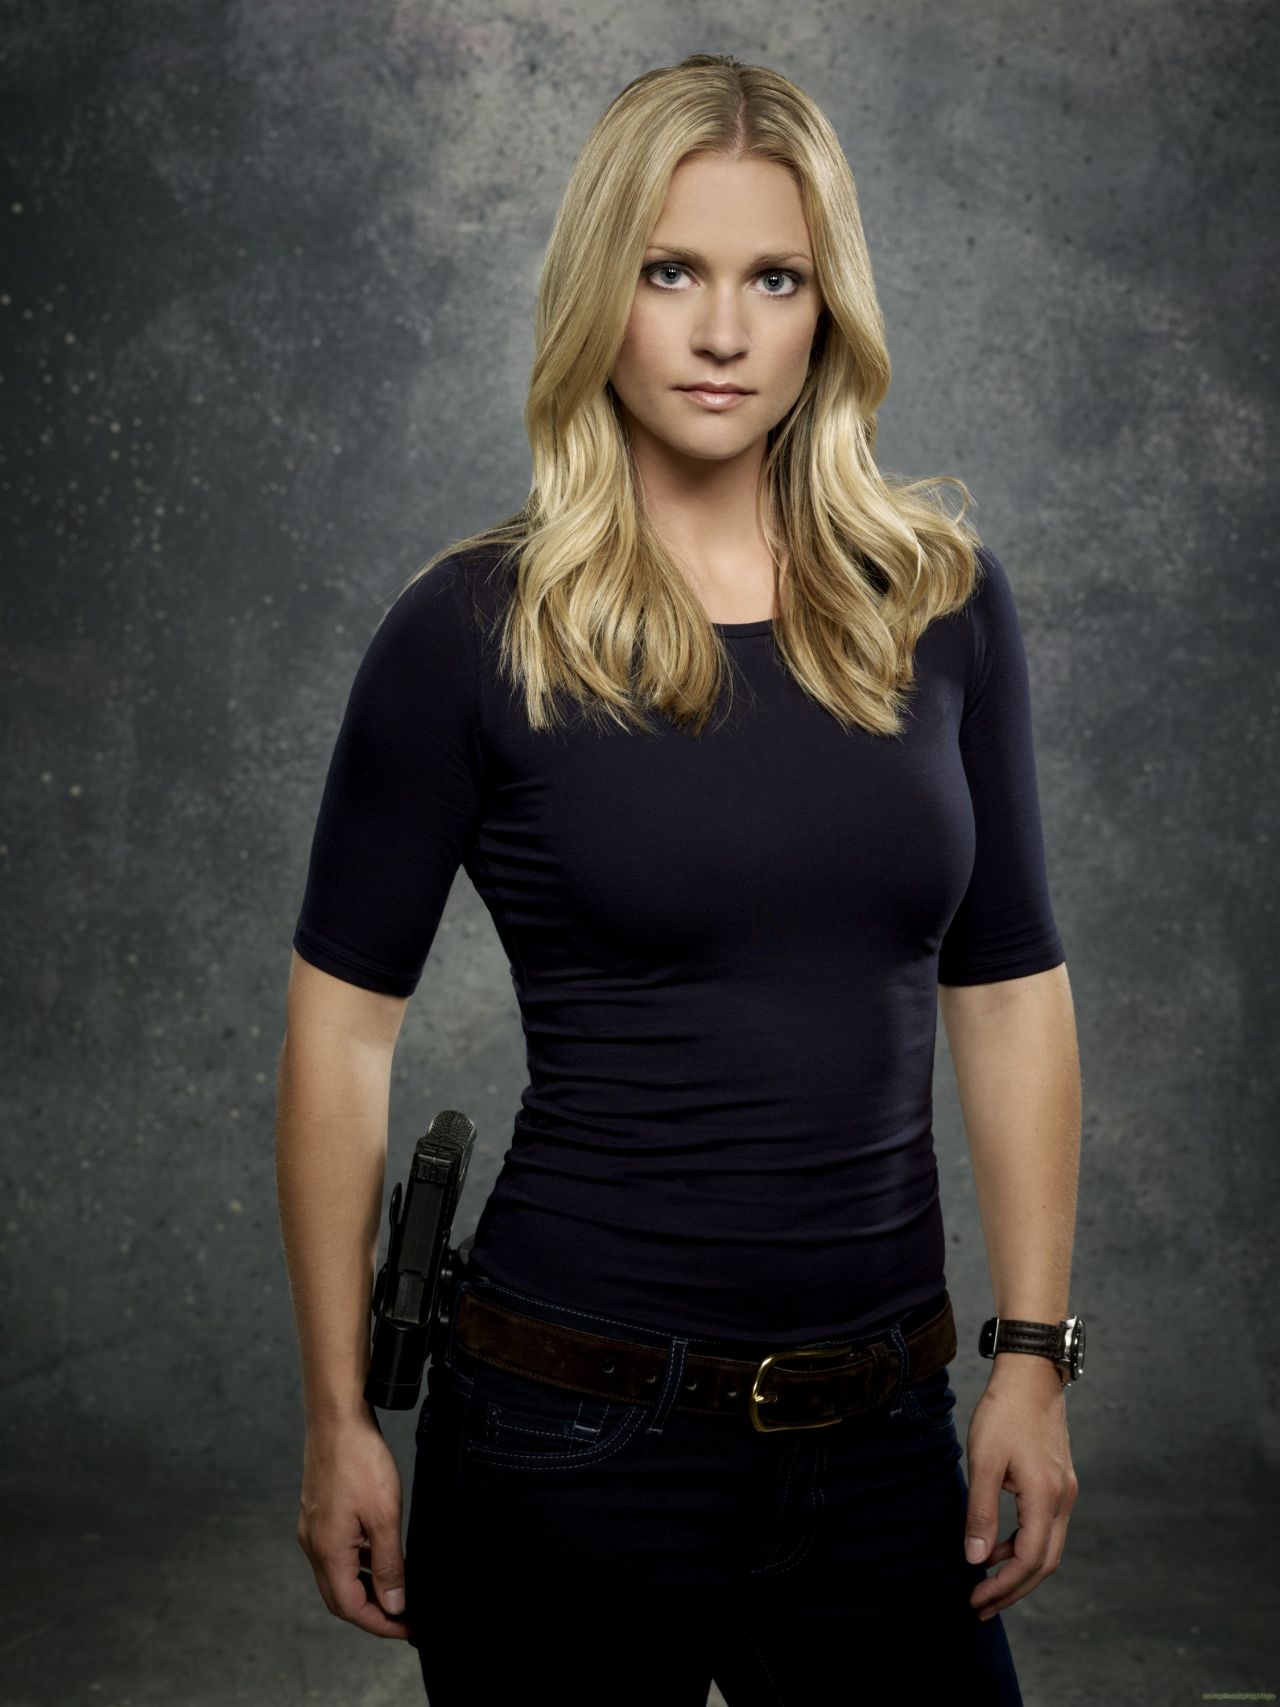 A J Cook Picture Wallaper _ Actrees Wallpaper in 2020 